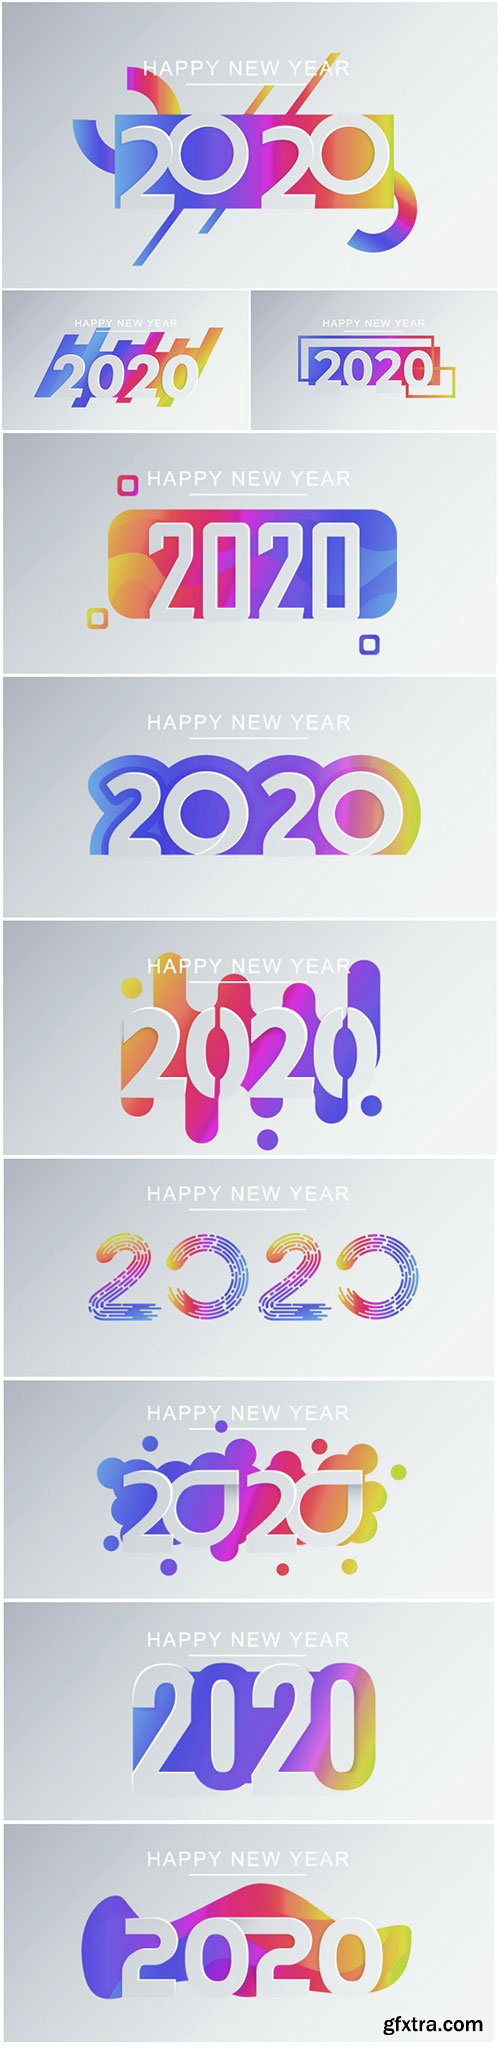 Happy New Year greeting card template, creative paper cut 